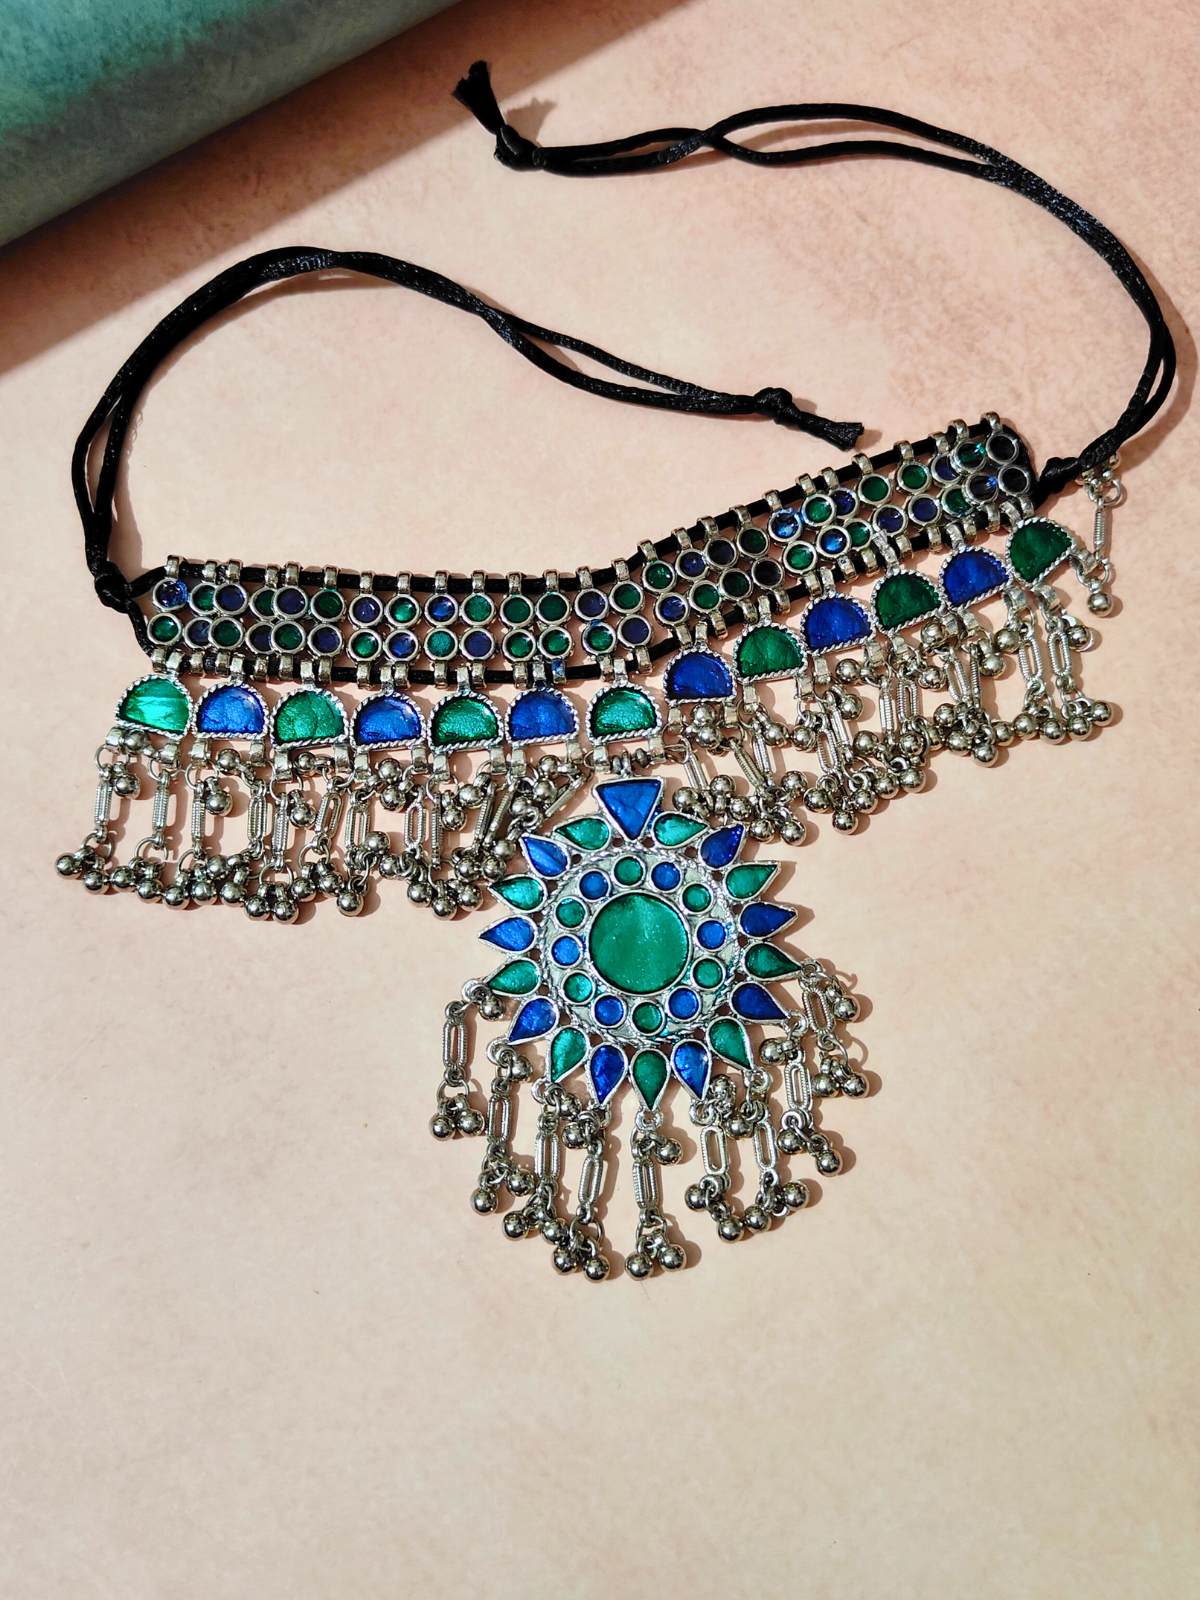 The Divine Surya Kiran Necklace in Shades of Blue